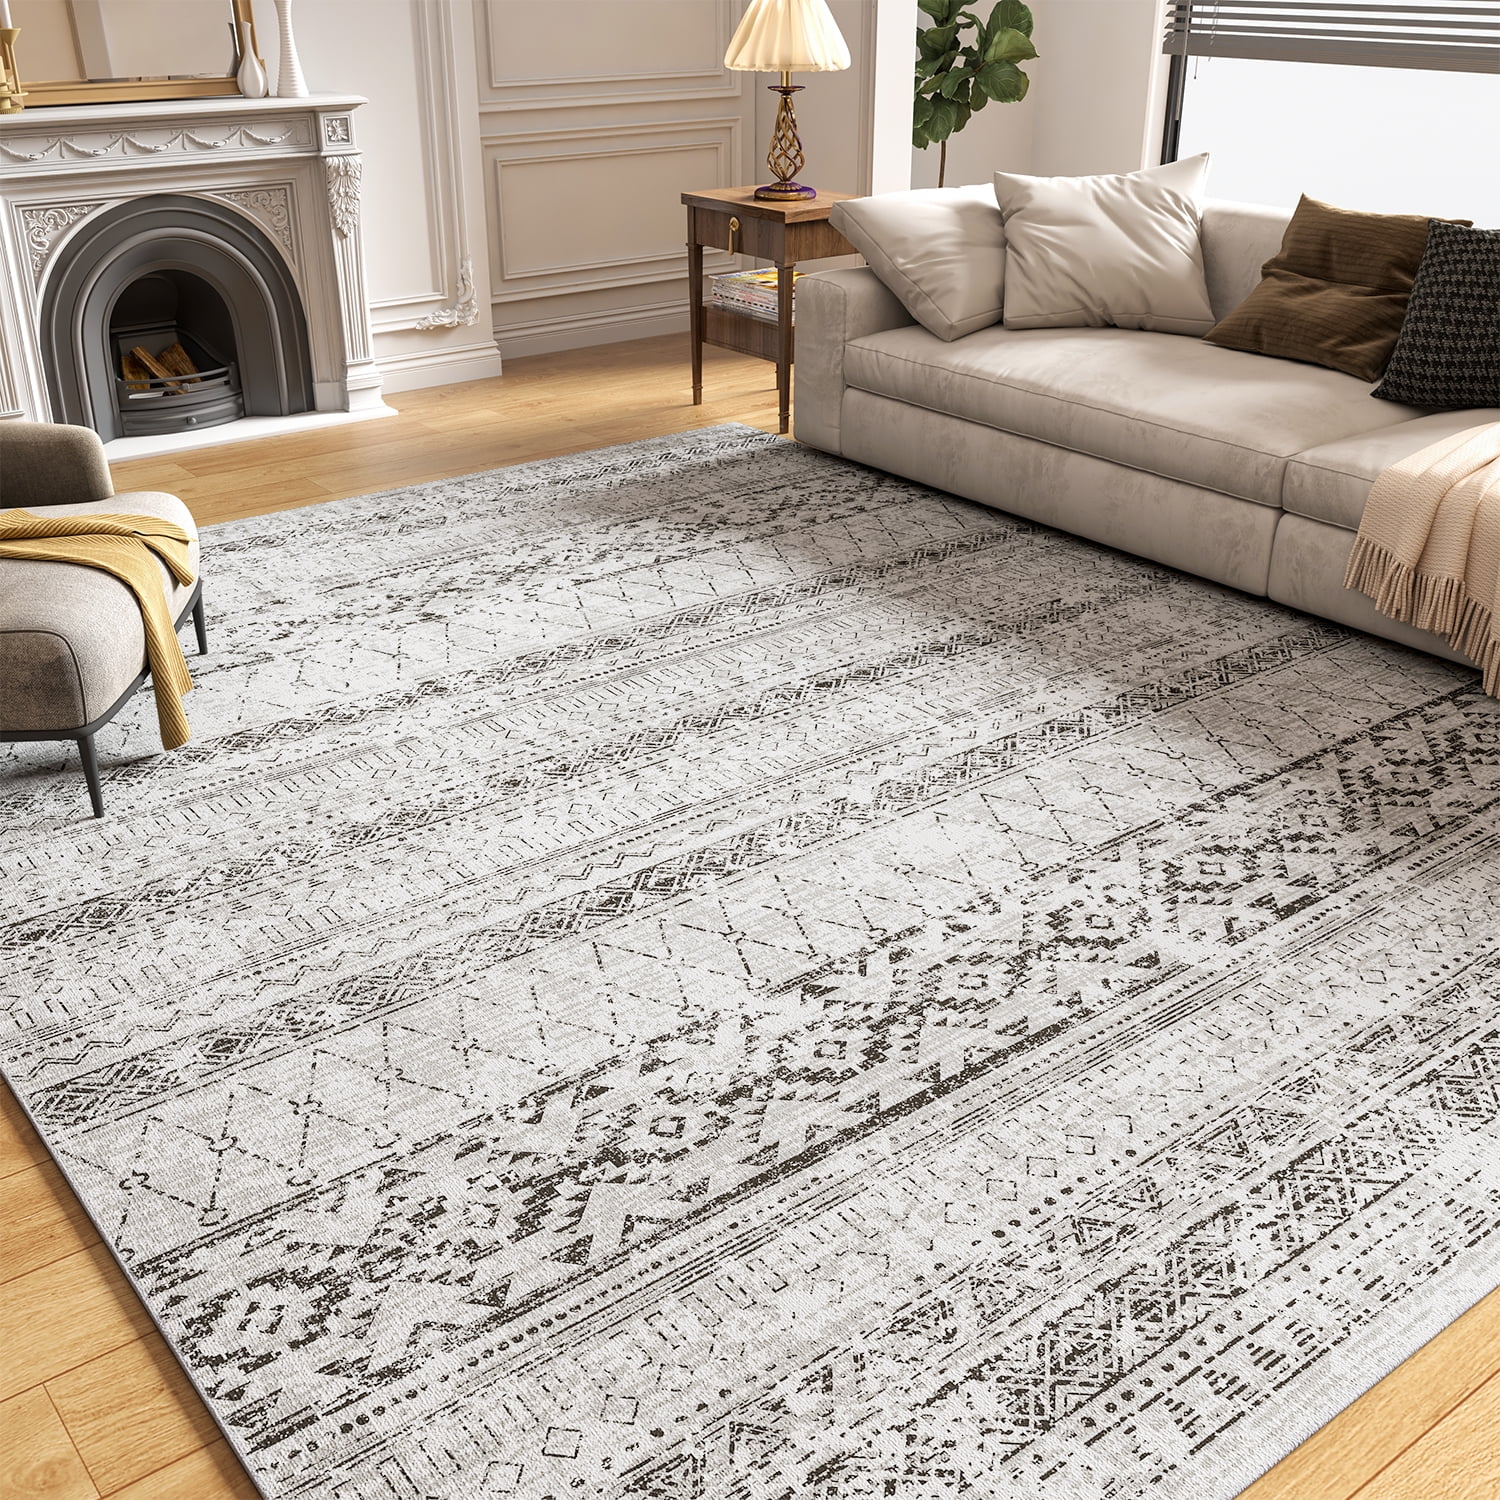 SIXHOME 3'x5' Area Rugs Washable Rugs for Living Room Boho Area Rug Modern  Geometric Neutral Carpets and Area Rugs for Home Decor Foldable Non Slip